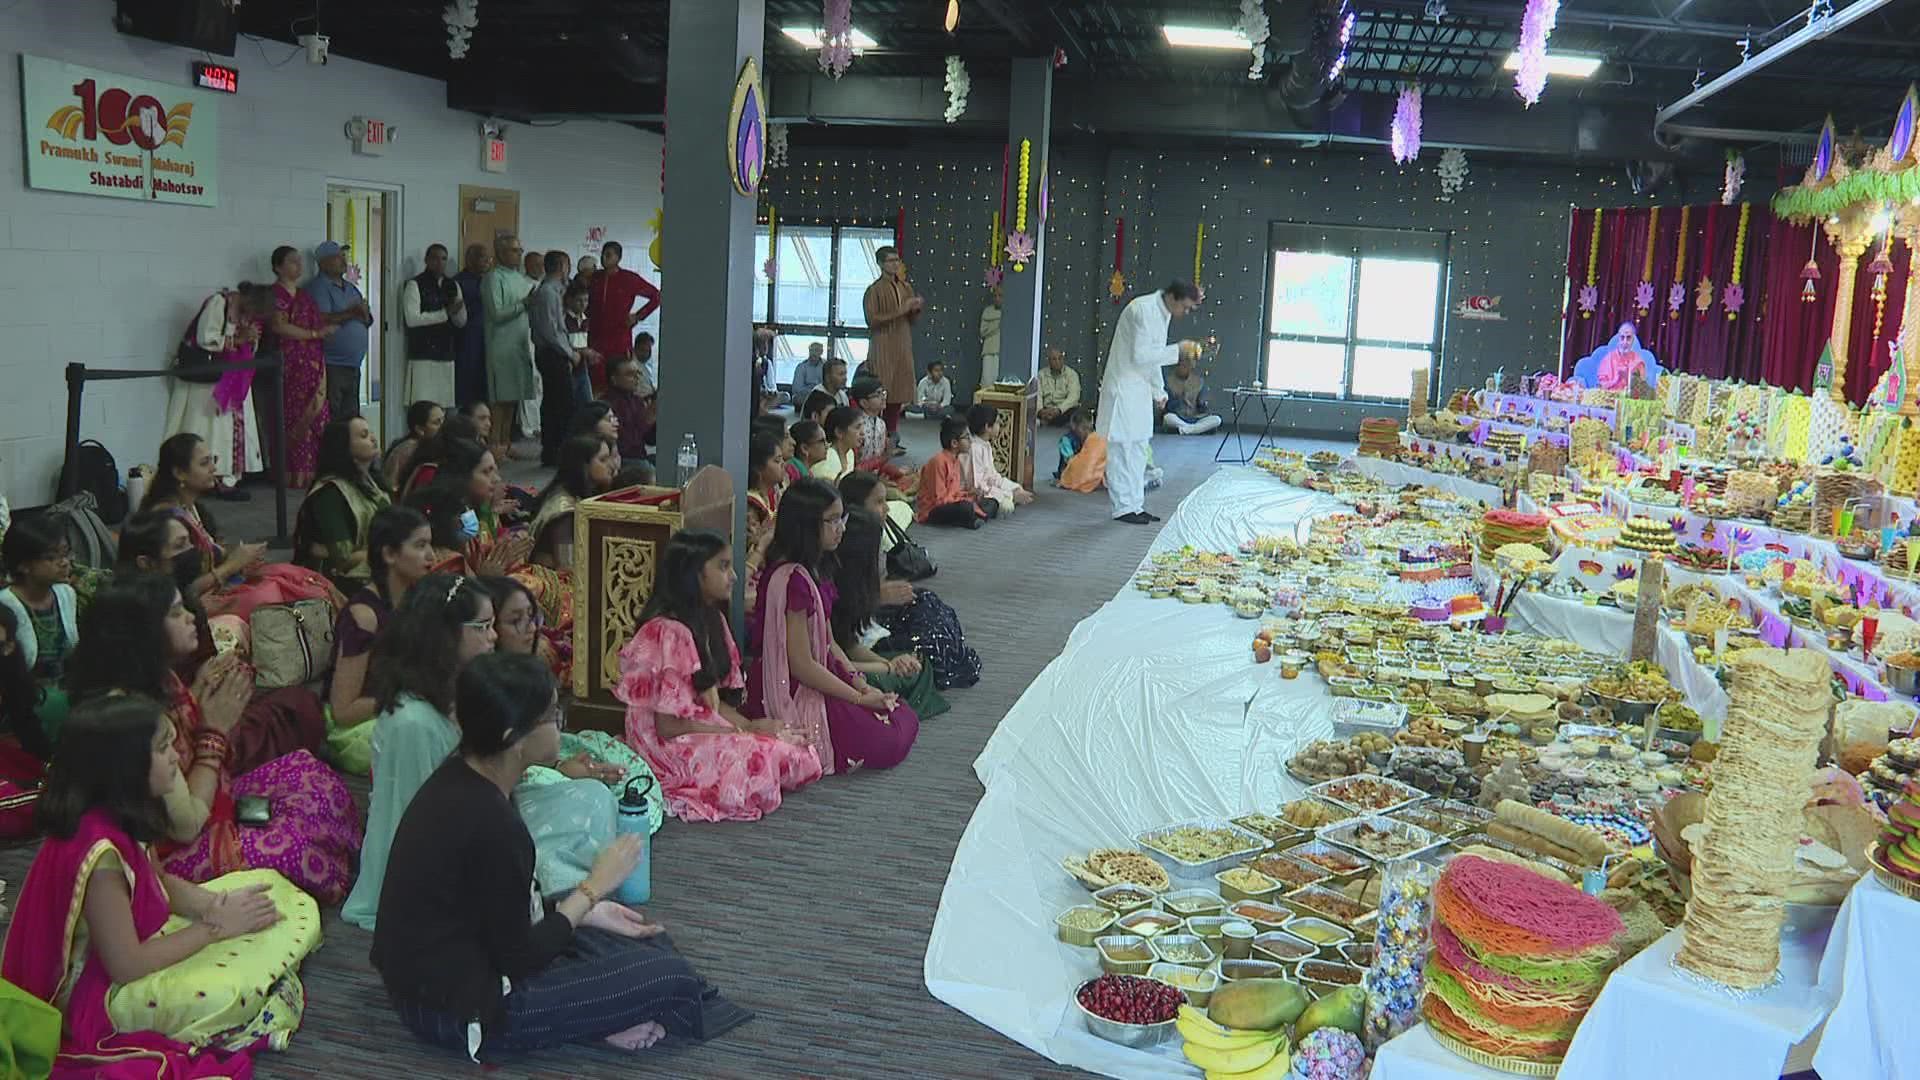 A "mountain of food" was prepared for a local celebration Wednesday.